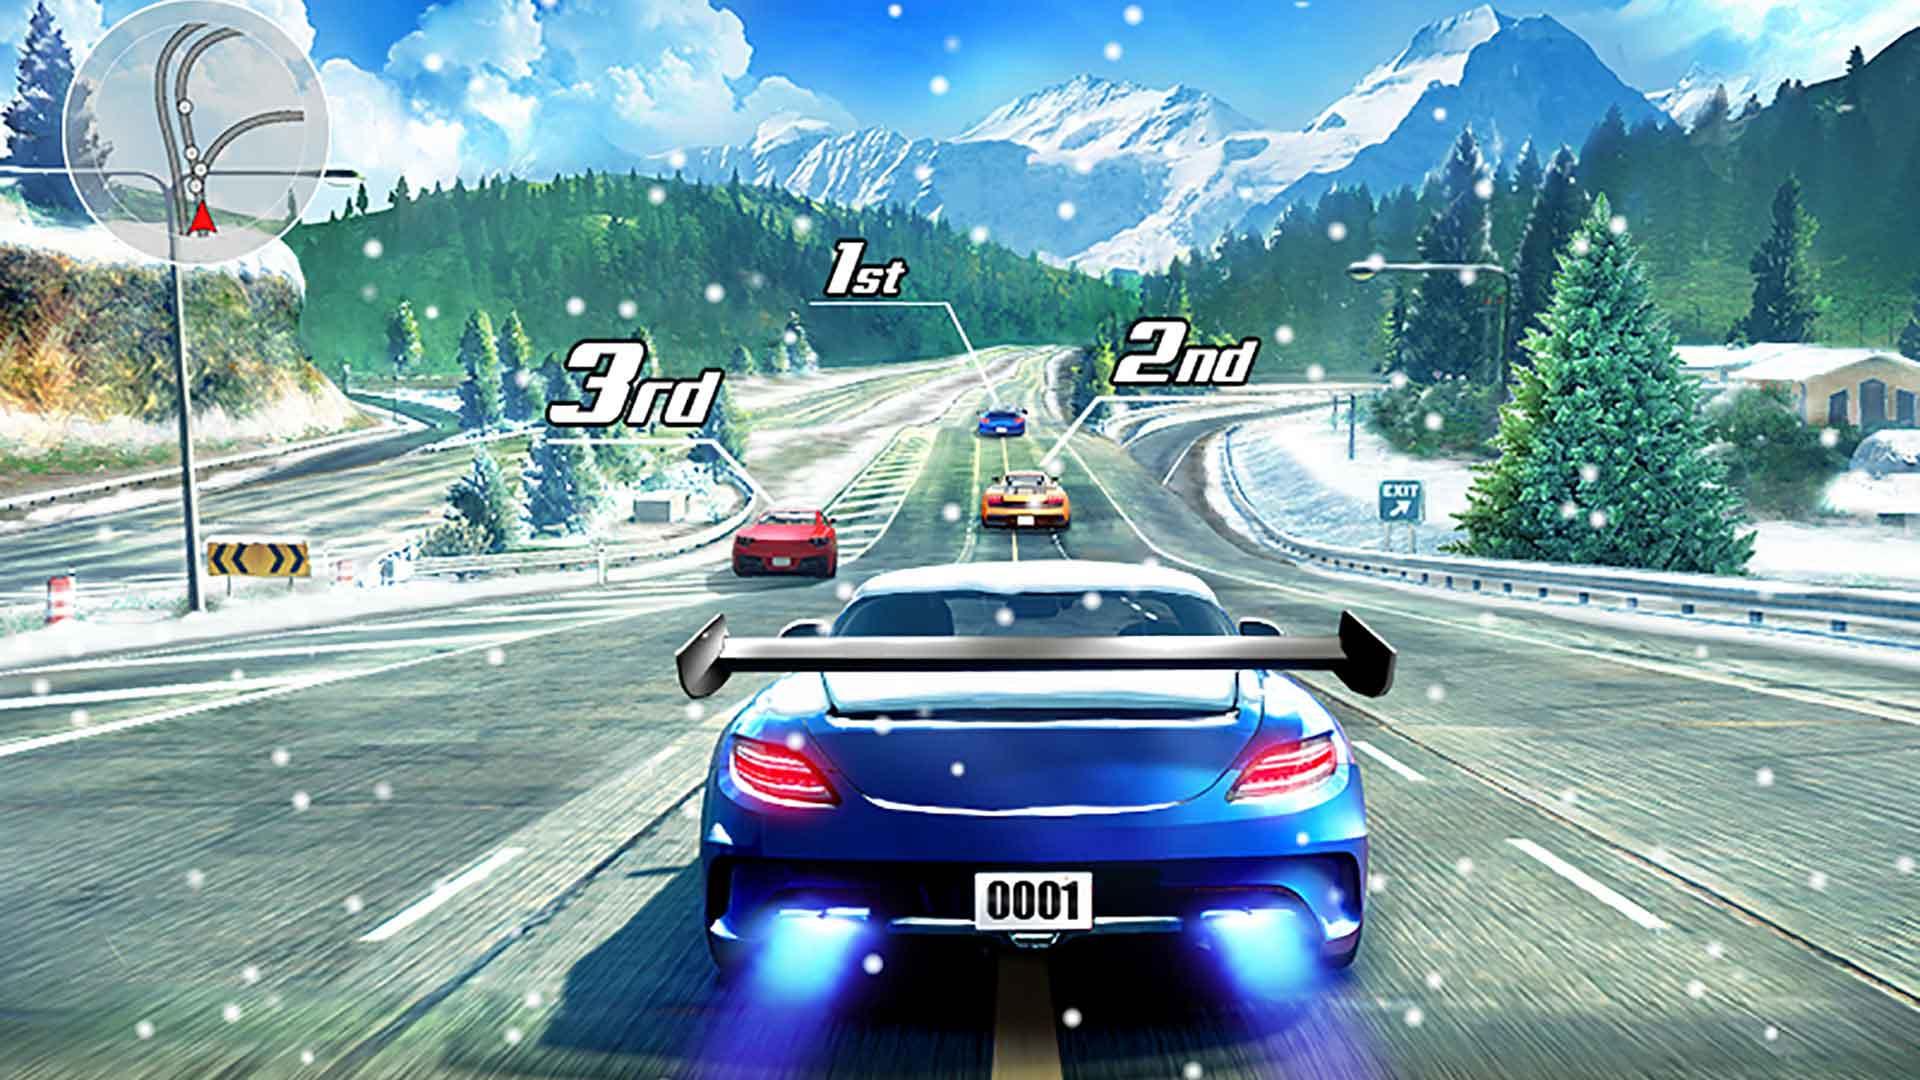 Street Racing 3D for Android - APK Download